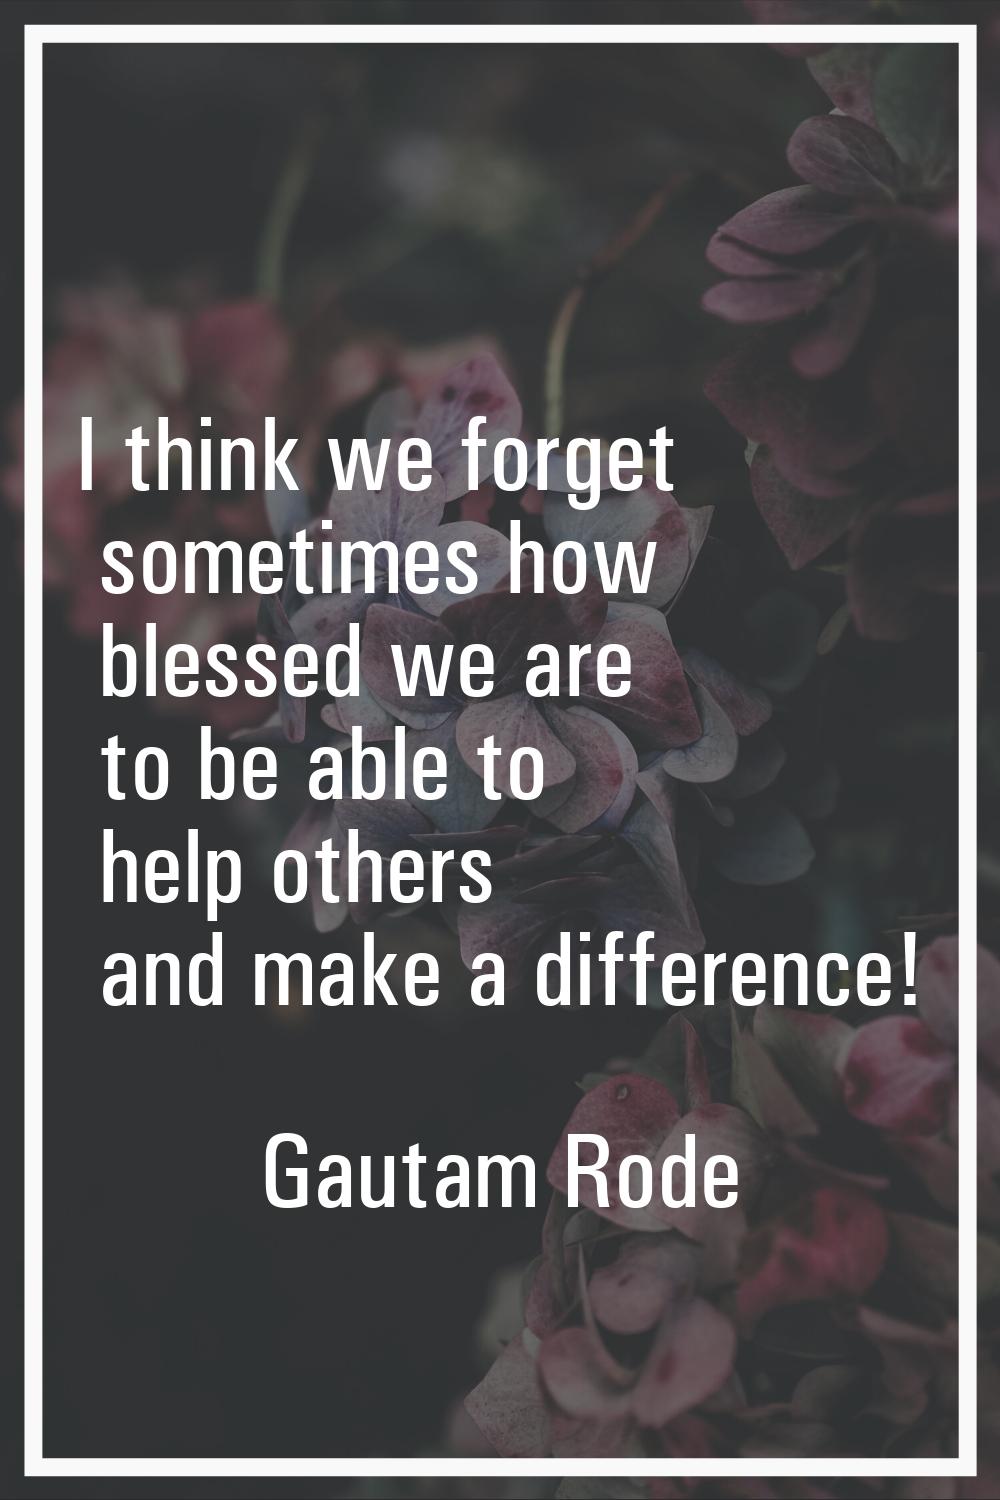 I think we forget sometimes how blessed we are to be able to help others and make a difference!